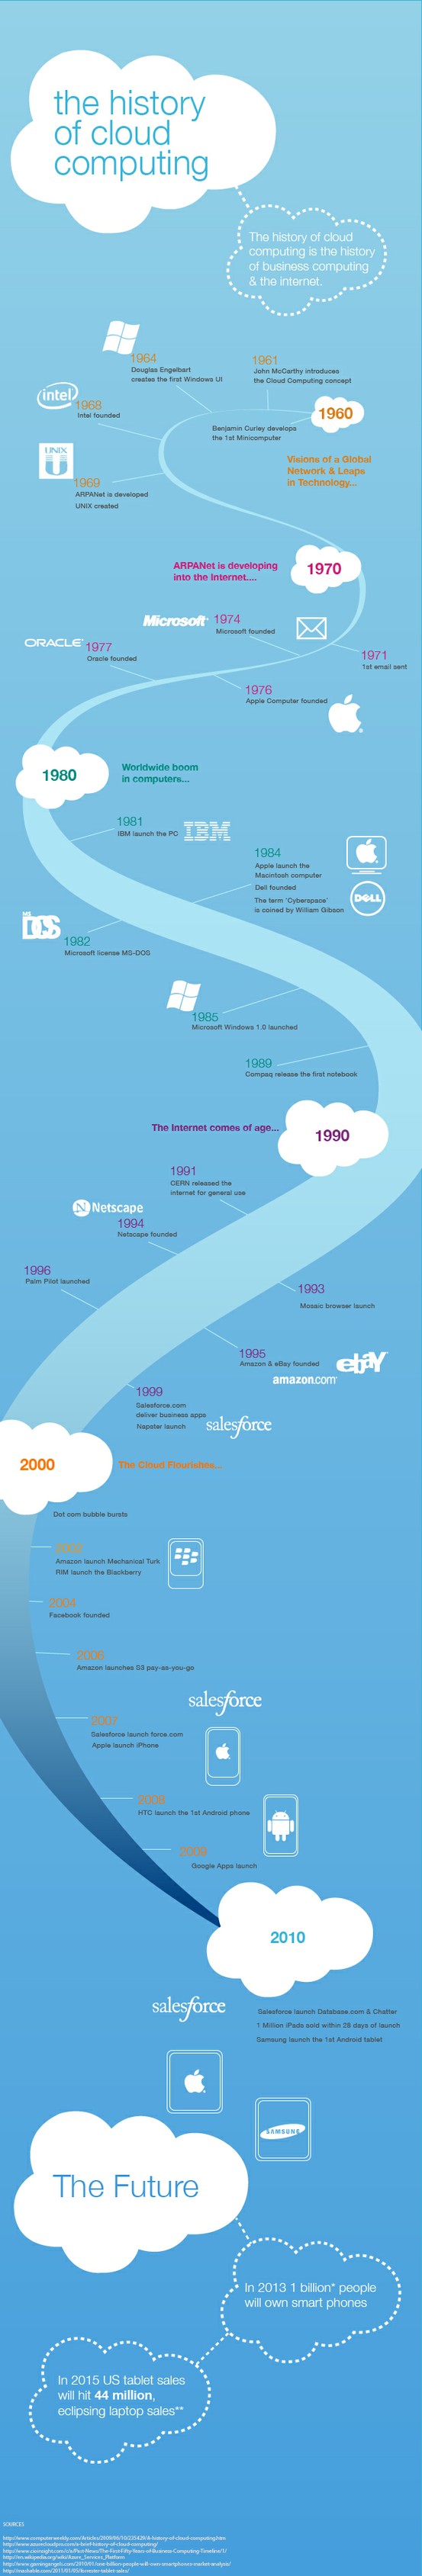 What is cloud computing? Everything you need to know about the cloud, explained